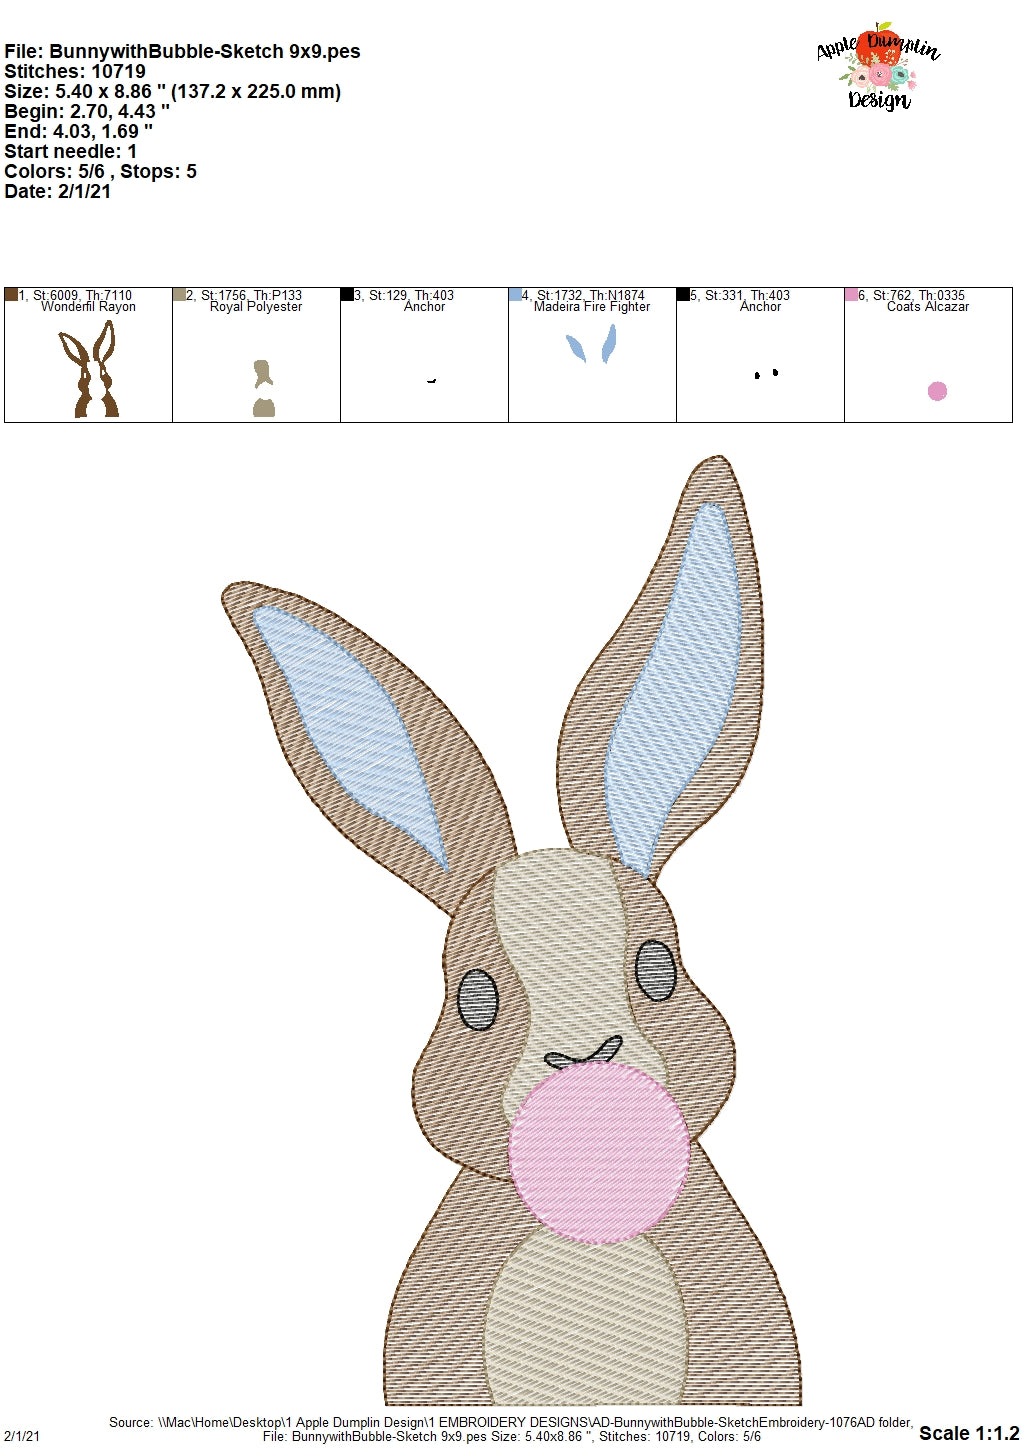 Bunny with Bubble Gum Sketch Embroidery Design, Embroidery